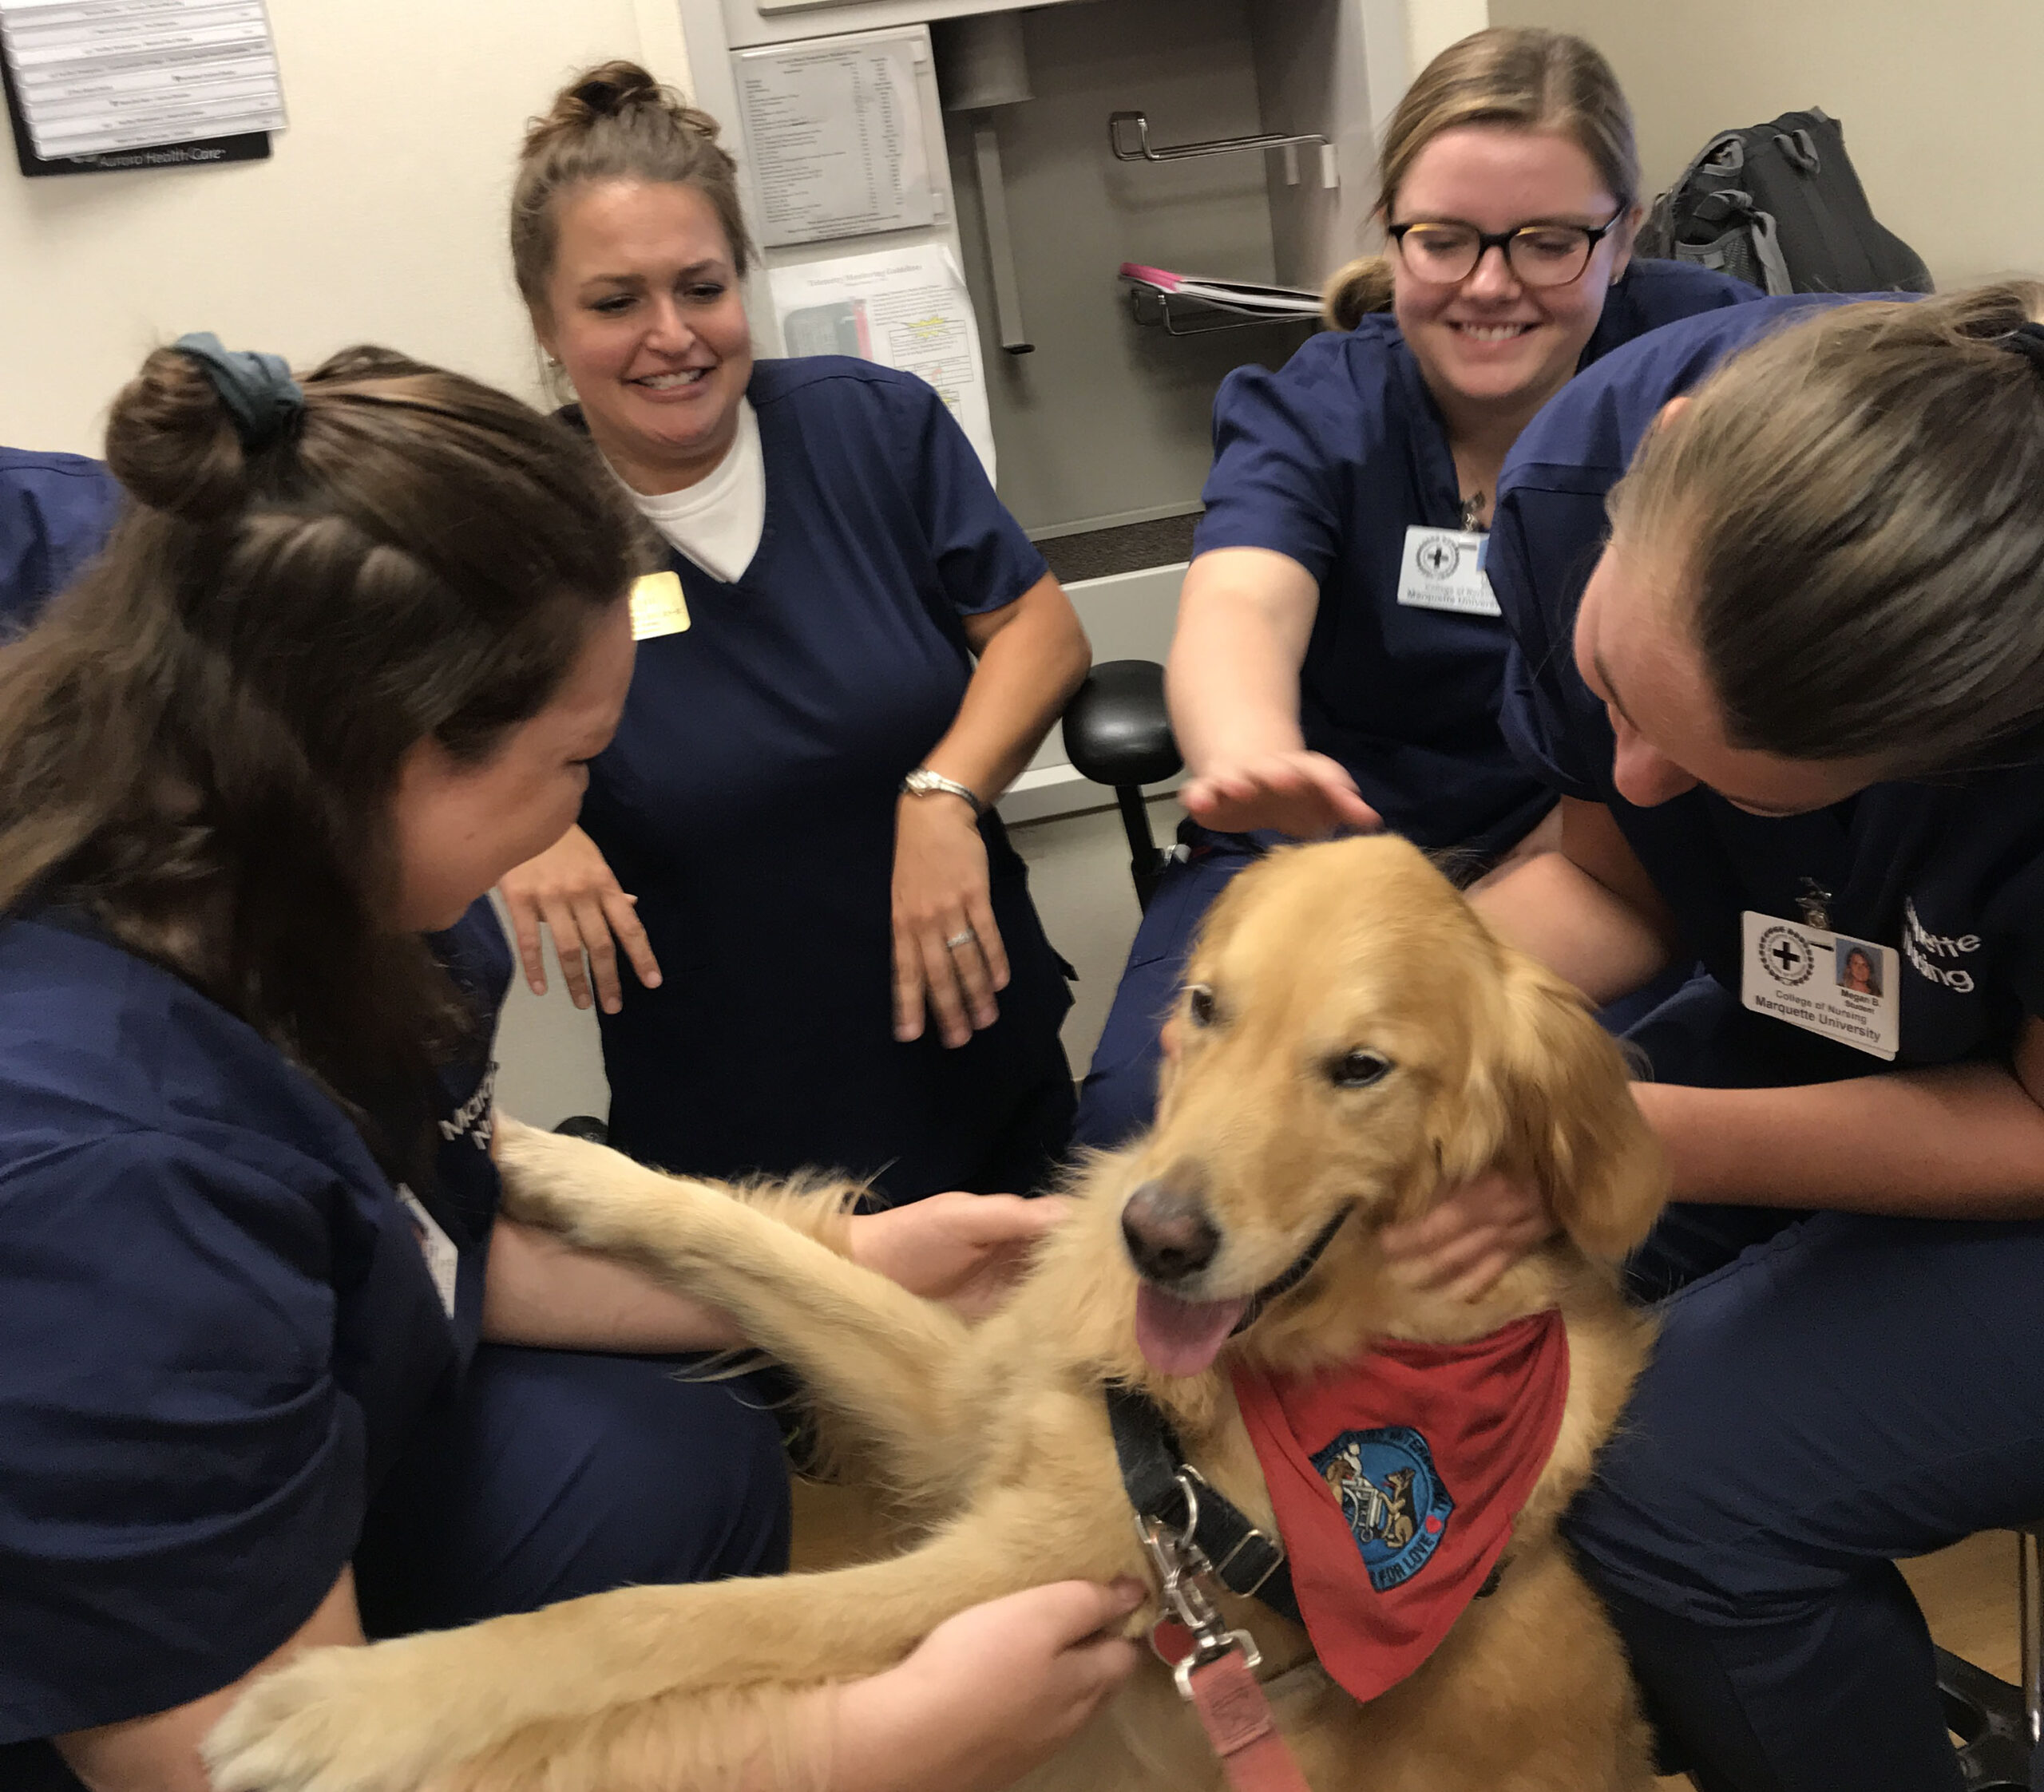 Nursing staff at Aurora St. Luke's Hospital in Milwaukee with Hannah the therapy dog.